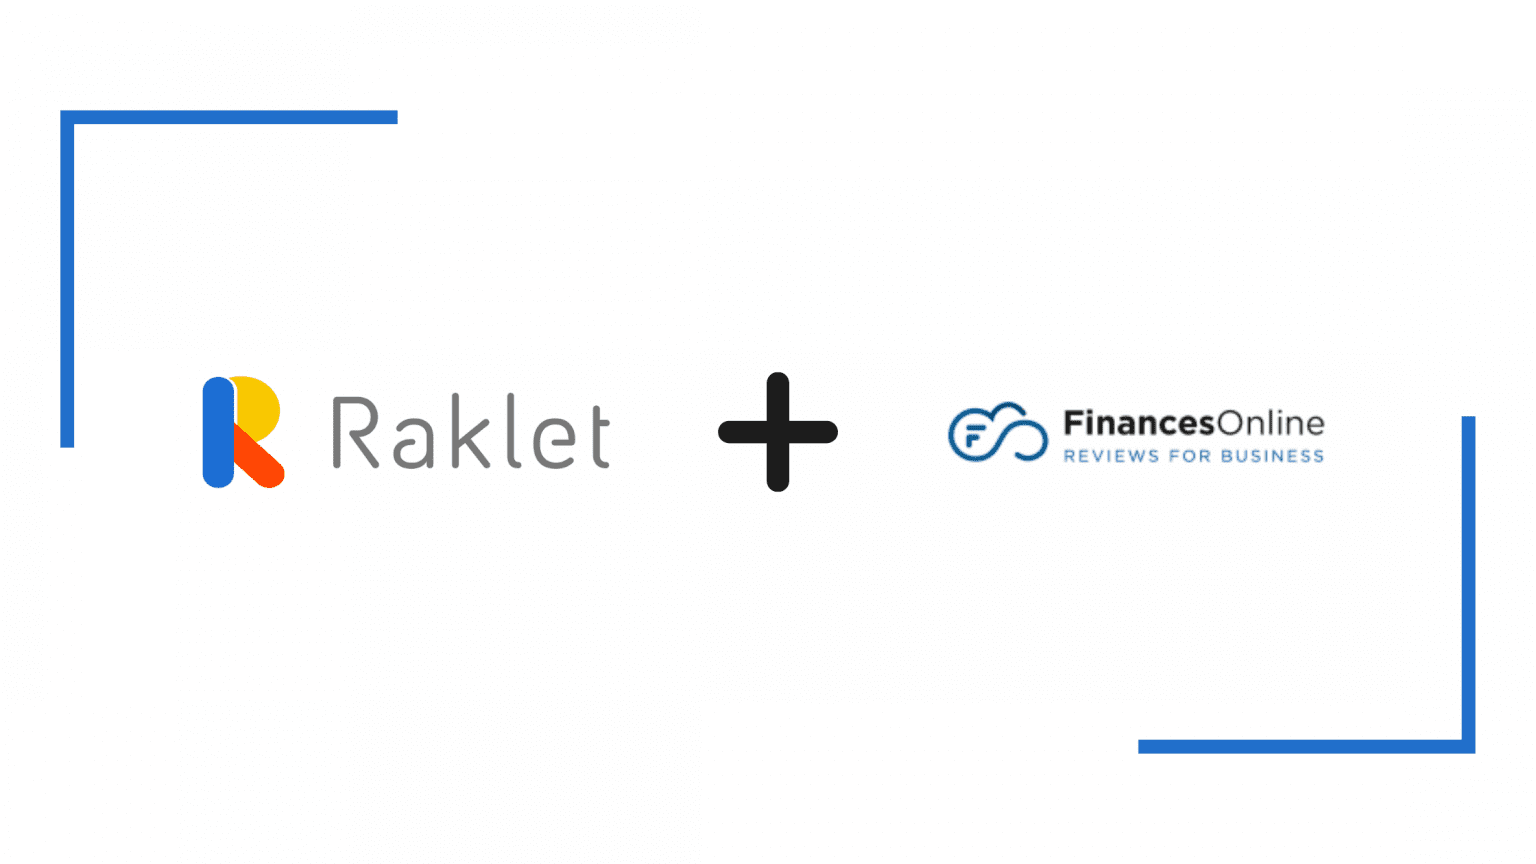 Raklet: The Rising Star of Community Management Services, According to Finances Online!